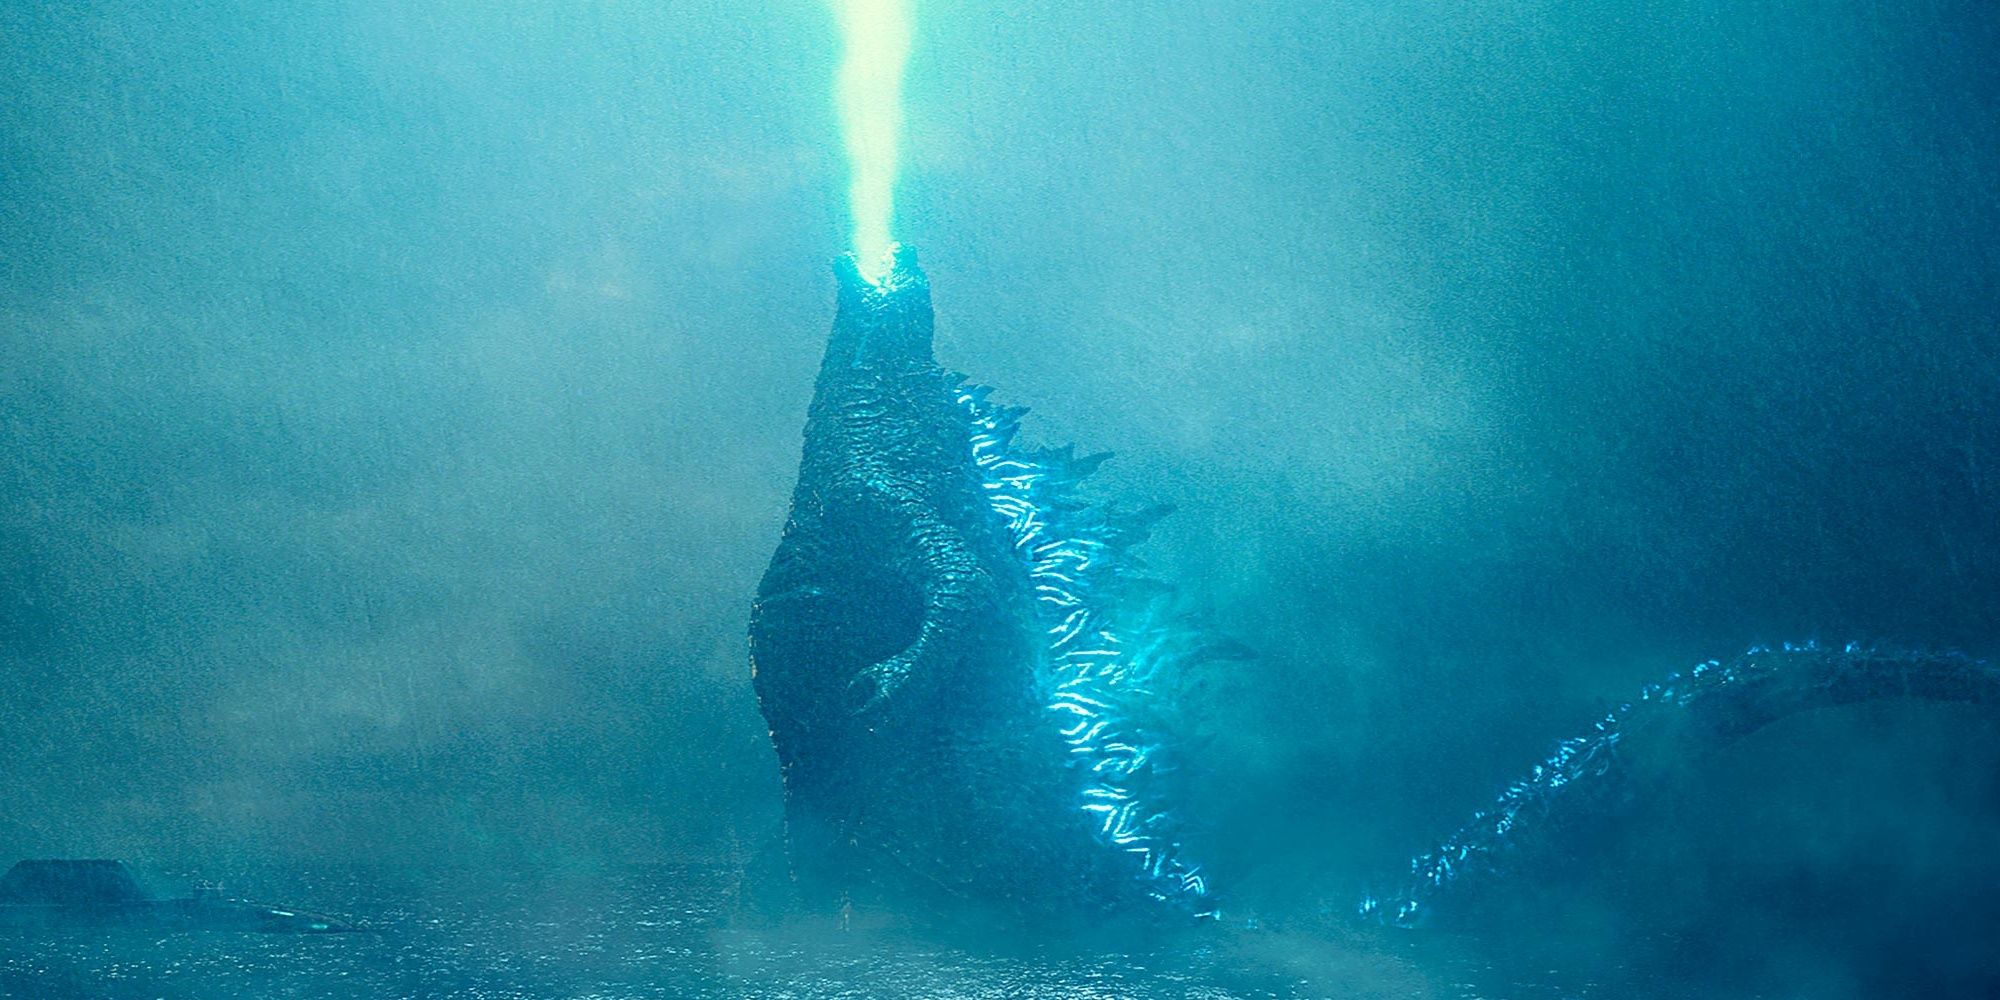 Godzilla blasts his laser beam into the sky in Godzilla: King of the Monsters